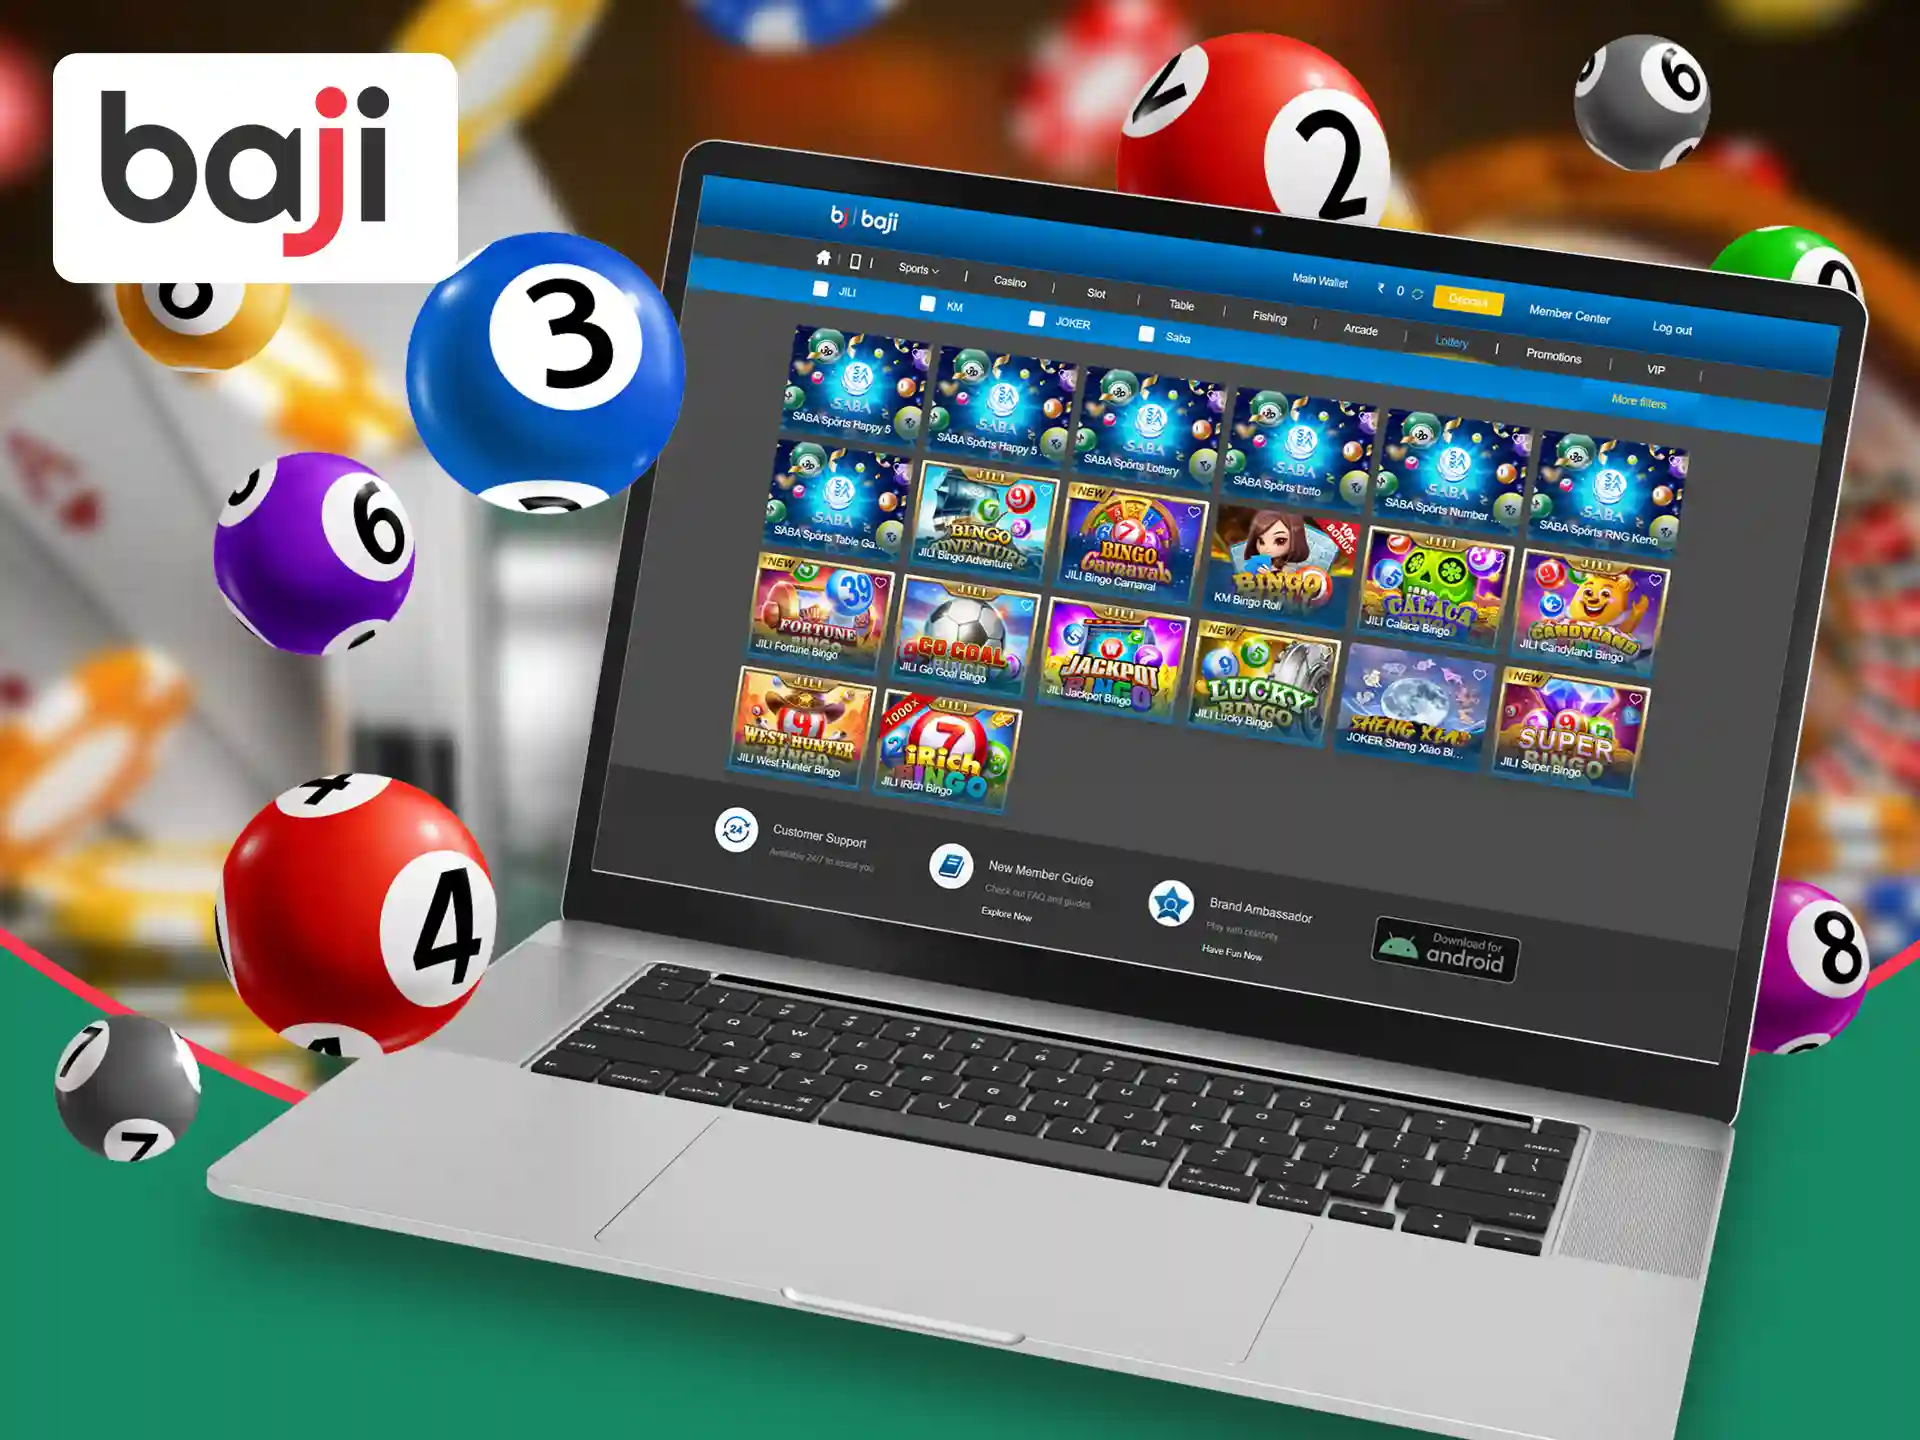 The Baji Bet website features several types of lottery games from popular providers.